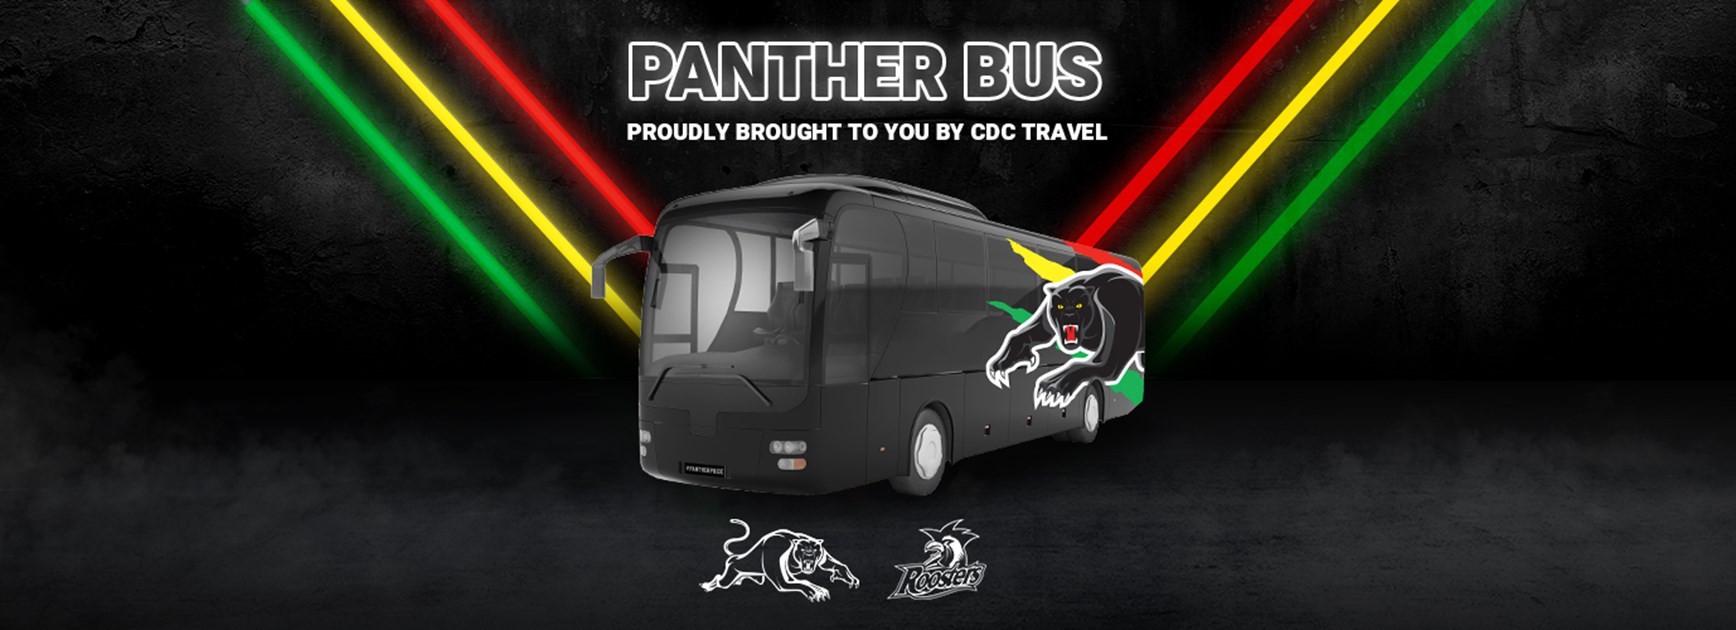 CDC Travel Panther Bus: Round 24